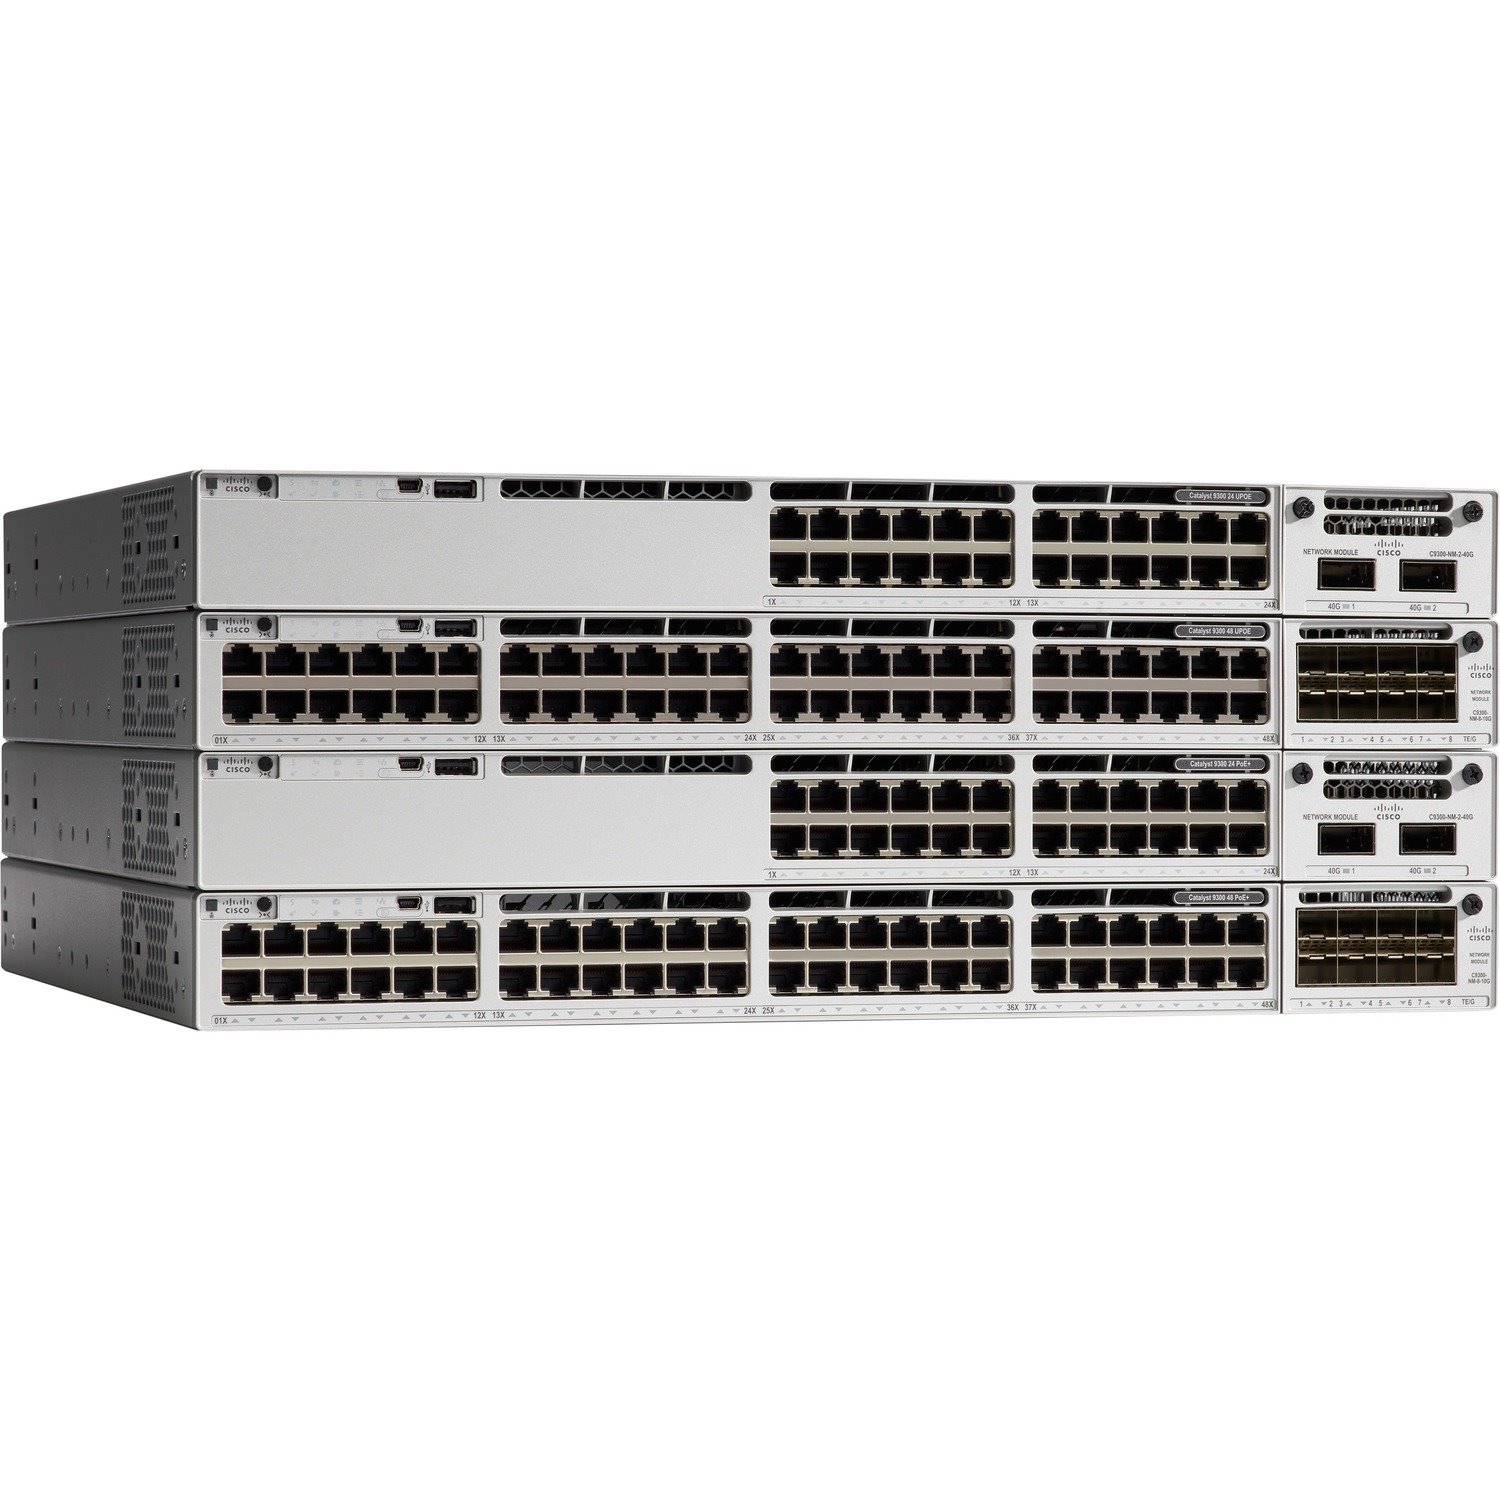 Cisco Catalyst 9300 C9300-24P 24 Ports Manageable Ethernet Switch